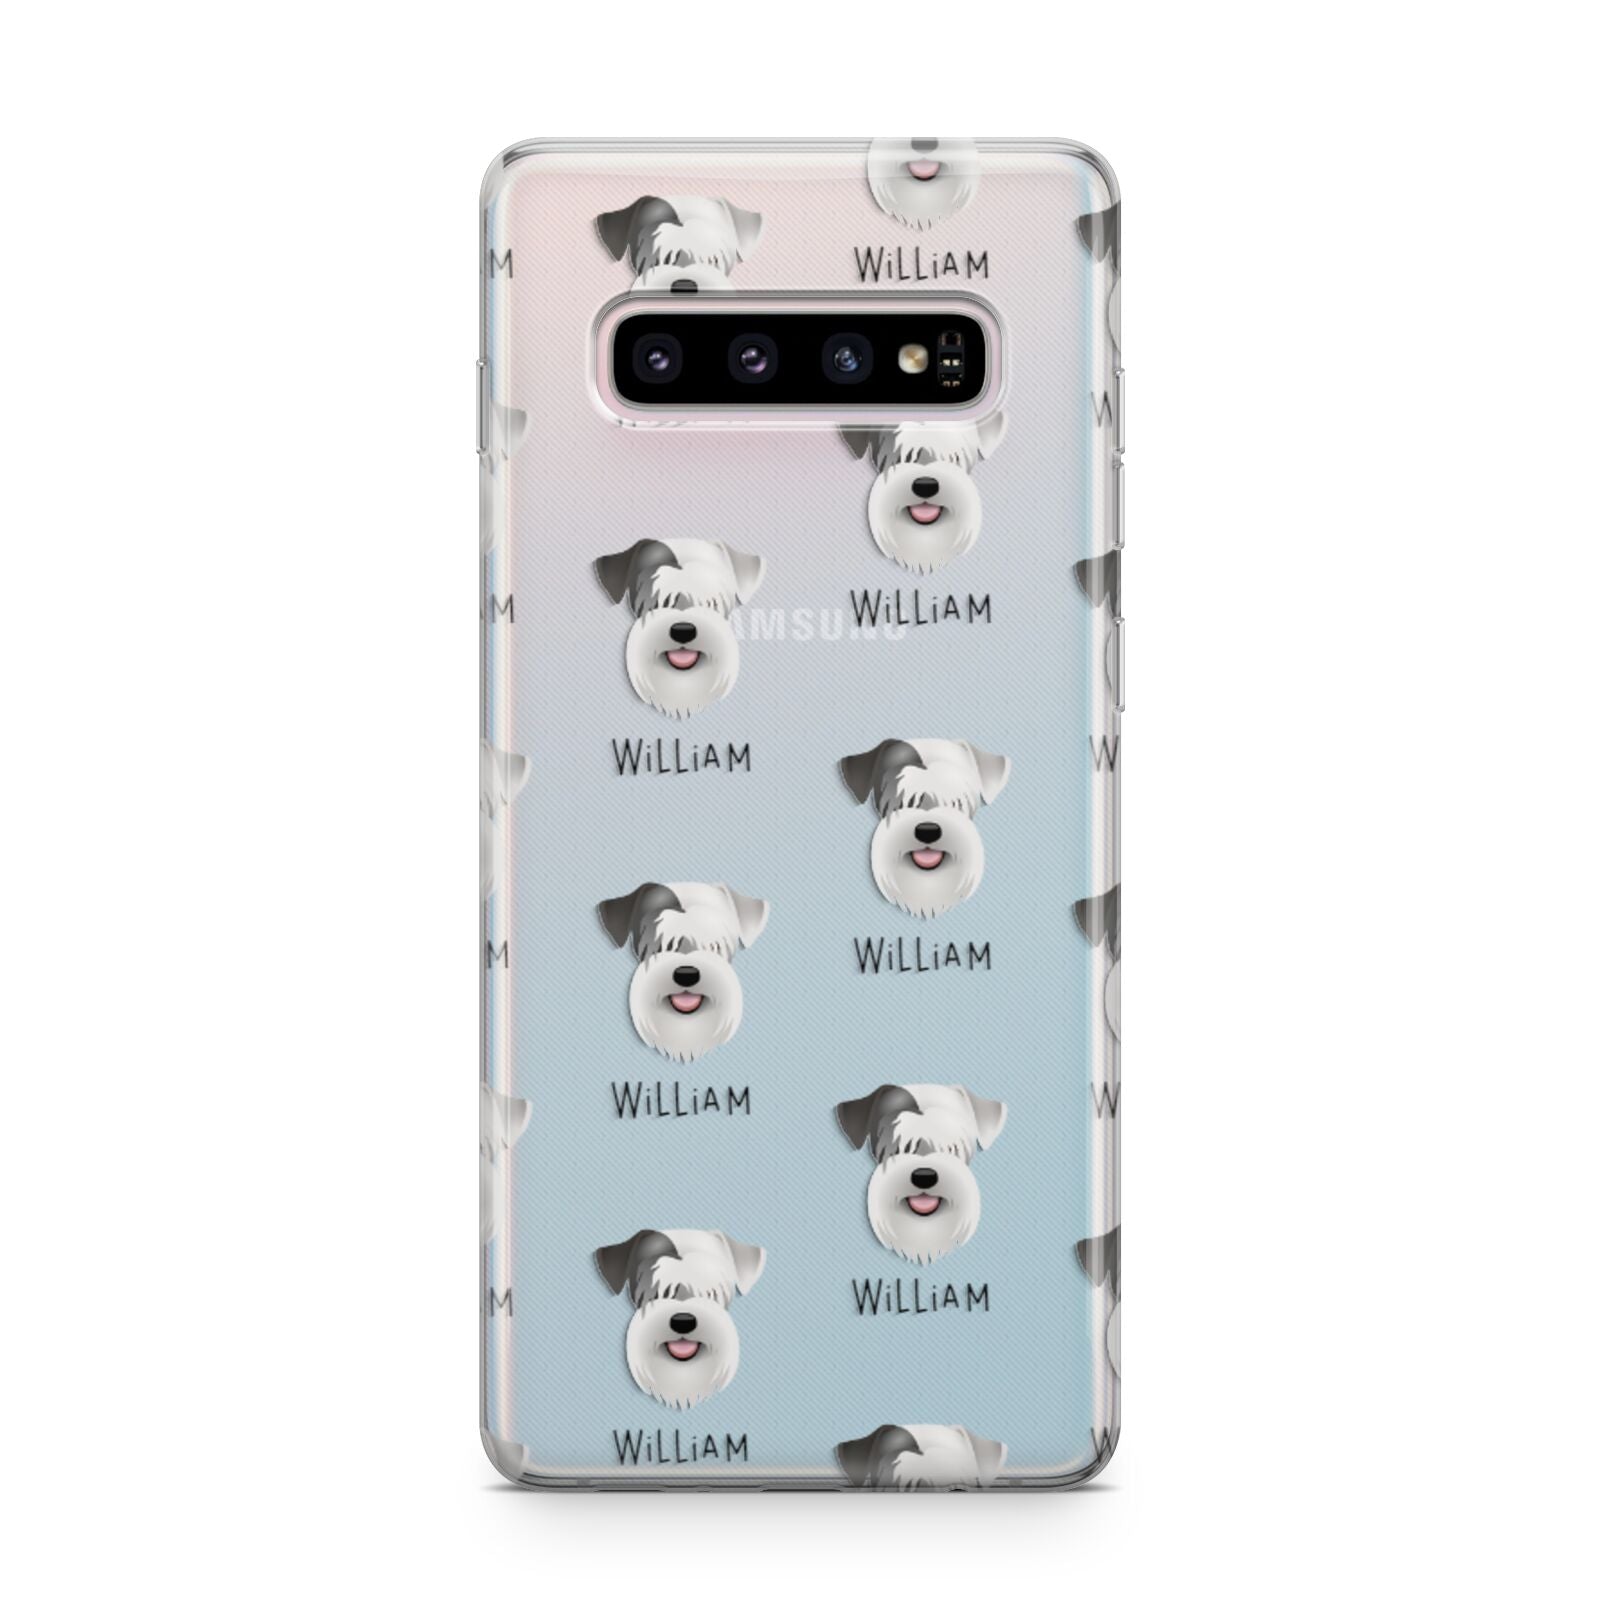 Sealyham Terrier Icon with Name Samsung Galaxy S10 Plus Case